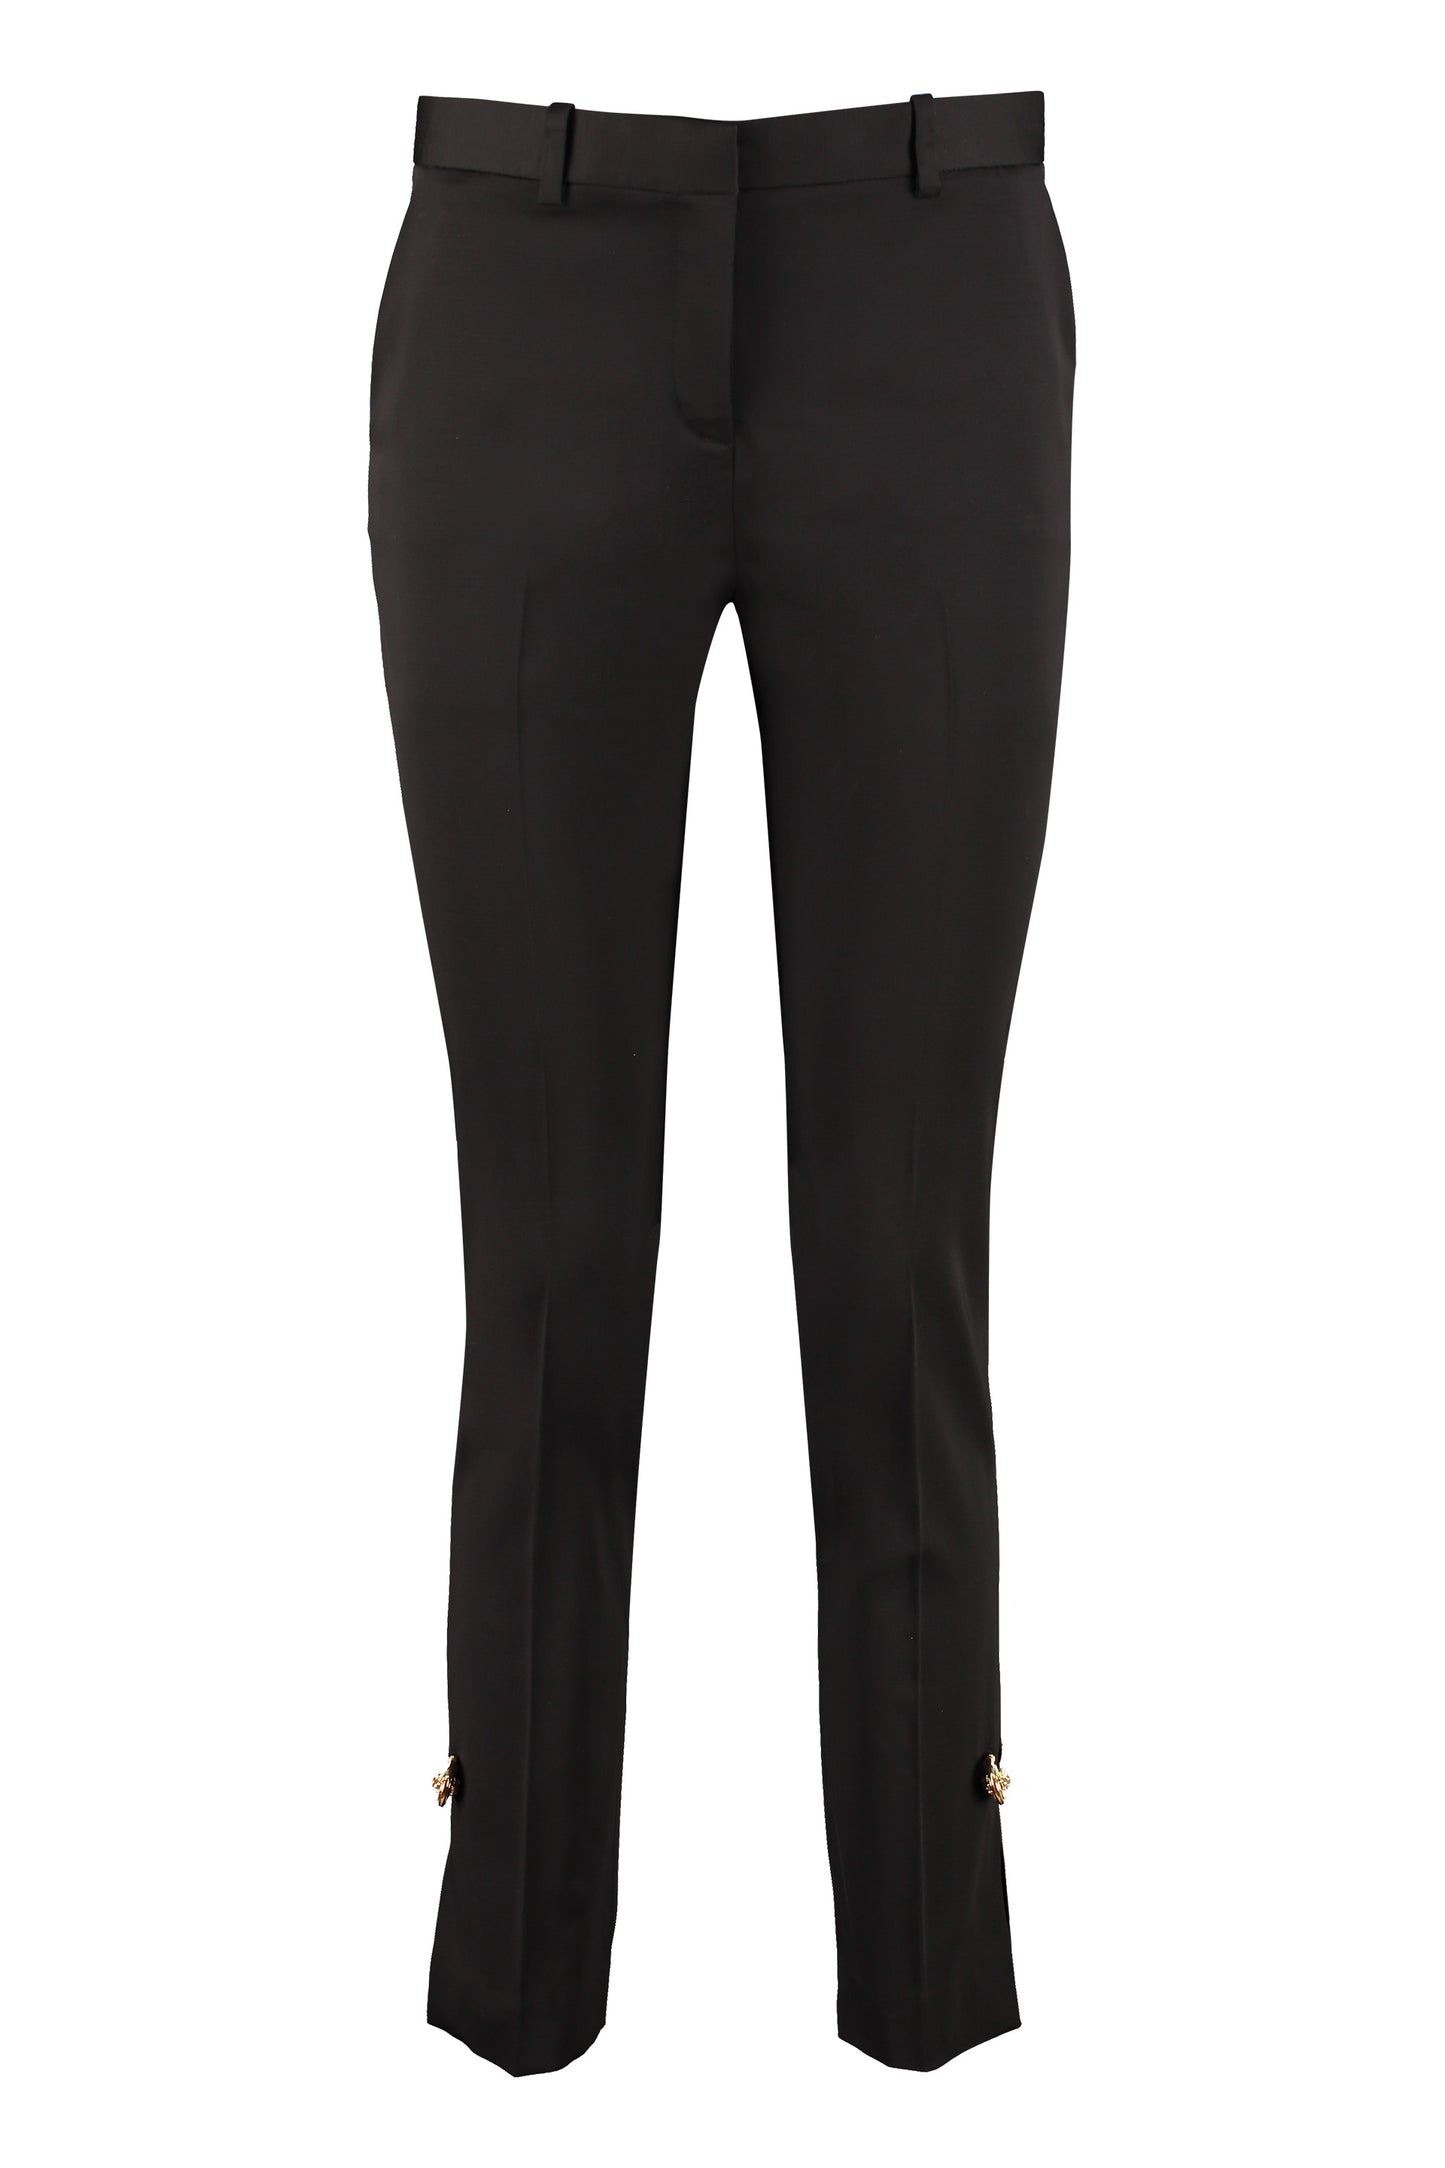 Decorative pin tailored trousers